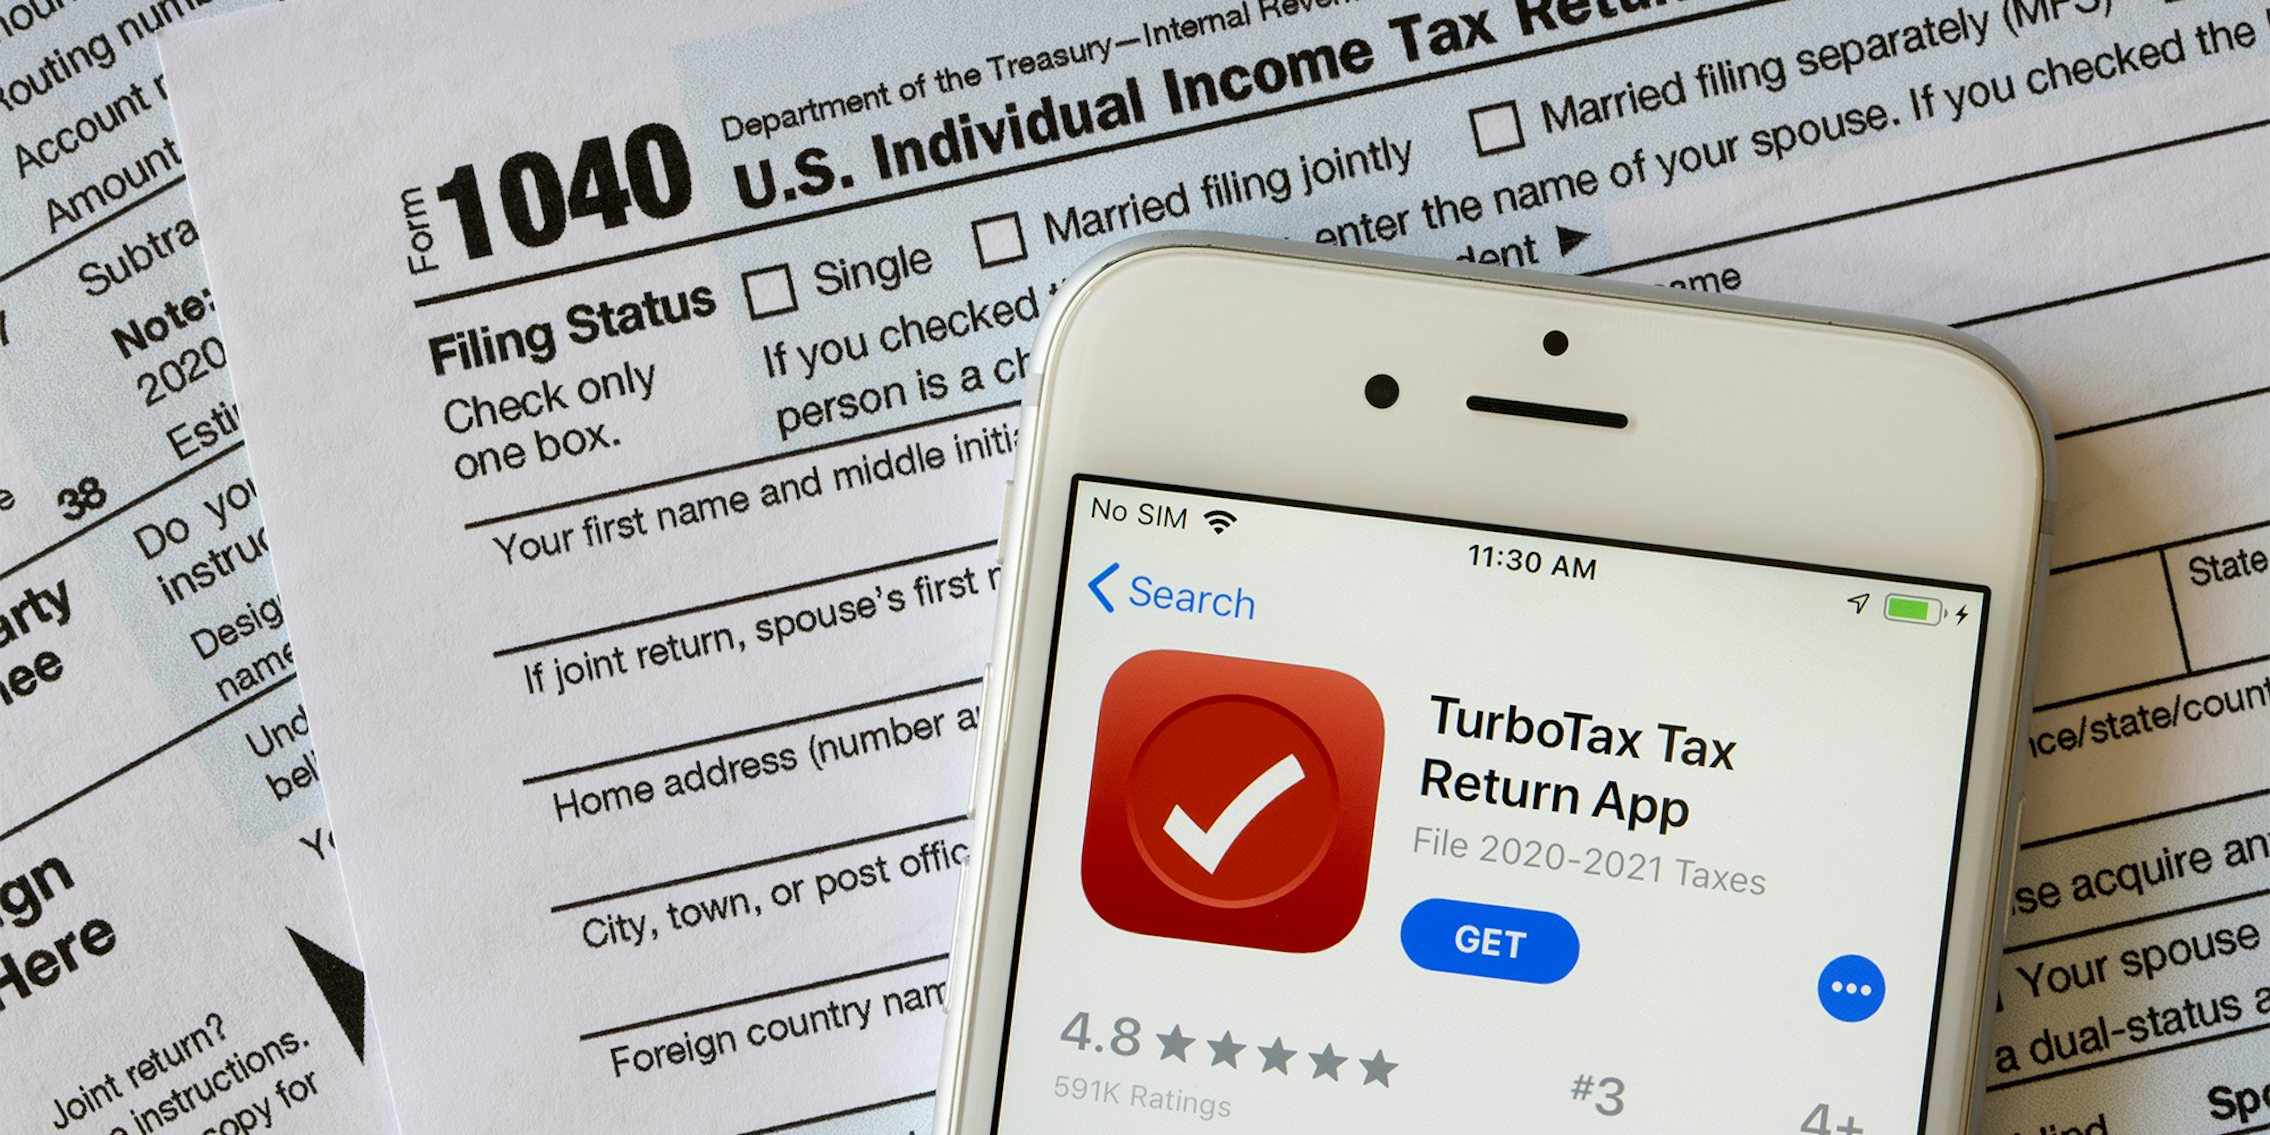 The TurboTax Tax Return App icon is seen on an iPhone atop the form 1040, U.S. Individual Income Tax Return.